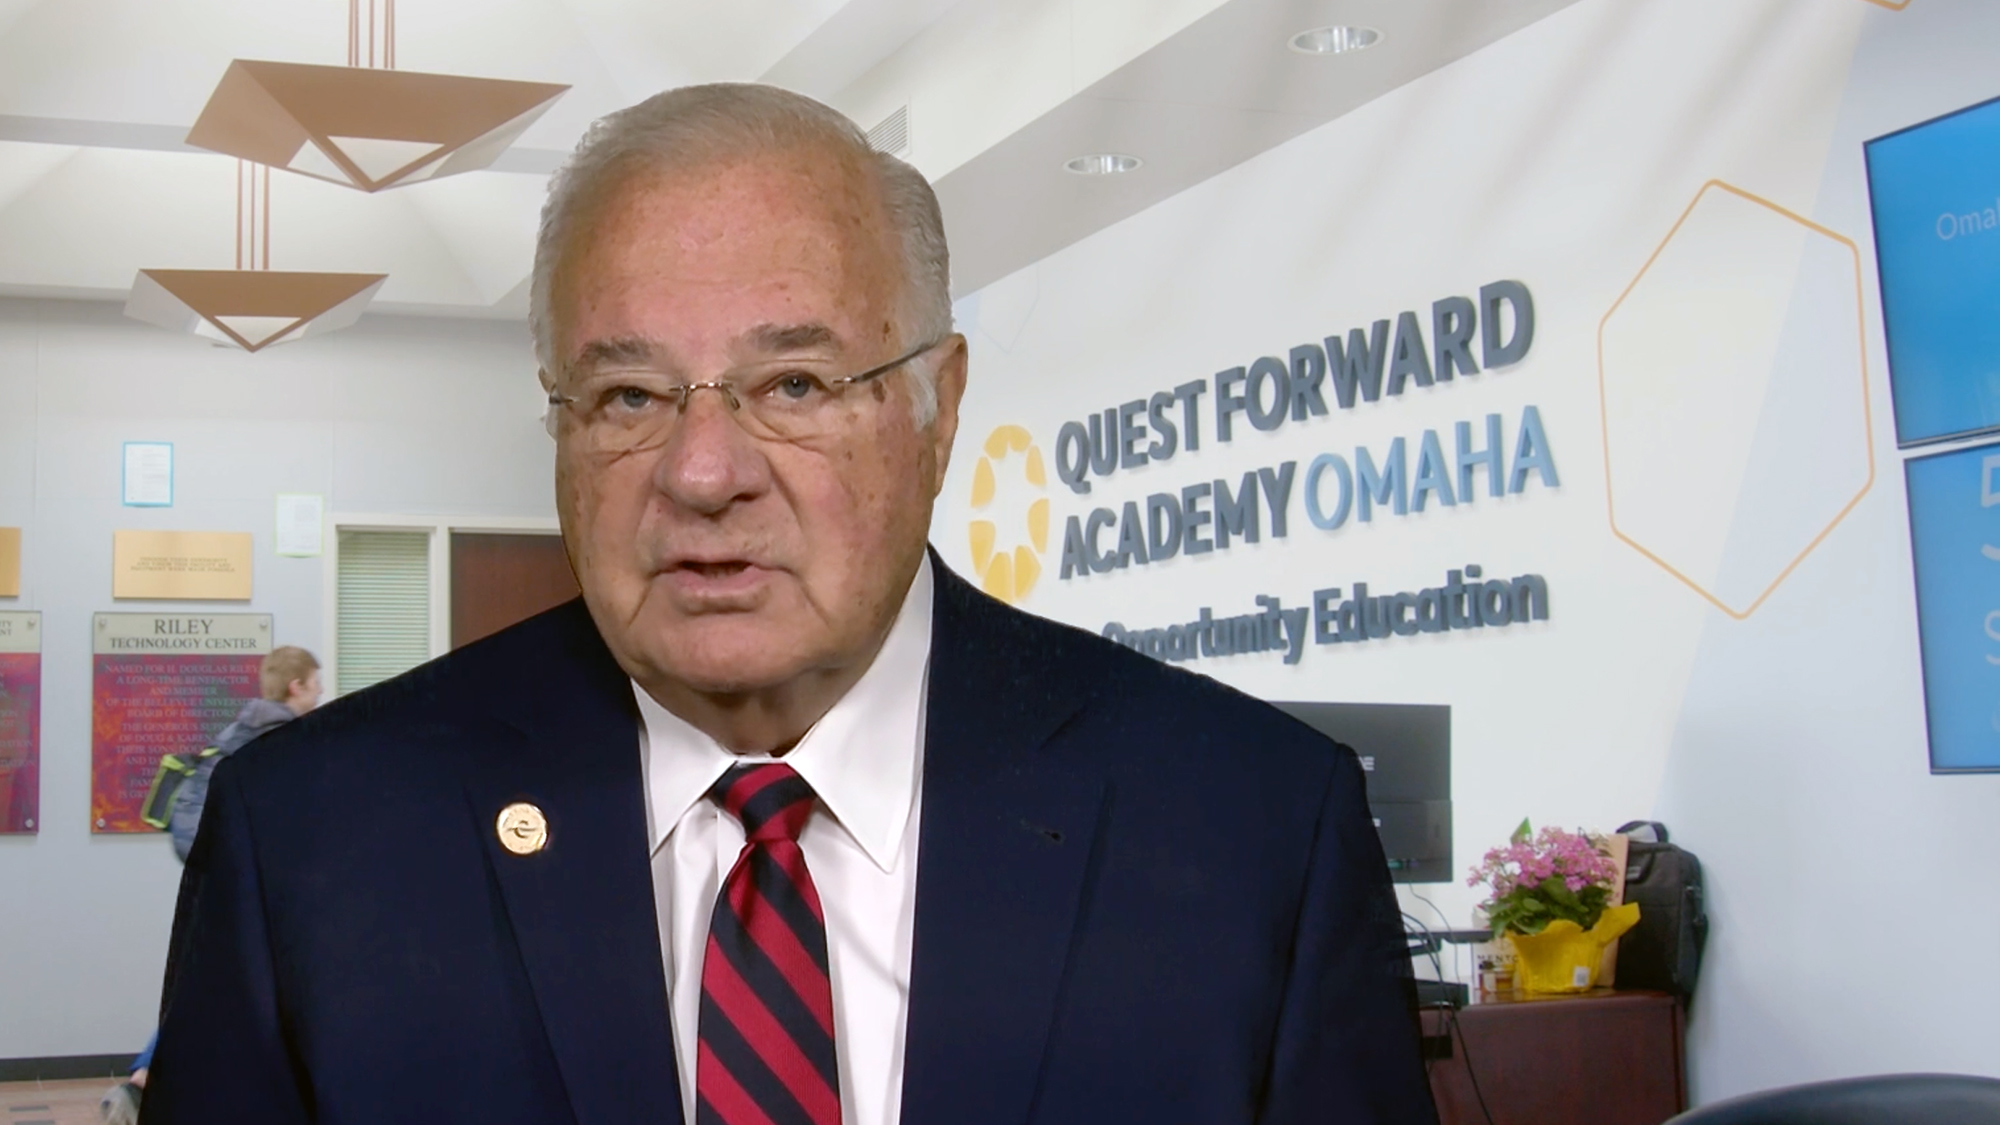 Video still: Opportunity Education Founder, CEO, and Benefactor Joe Ricketts discusses the challenges facing education today.